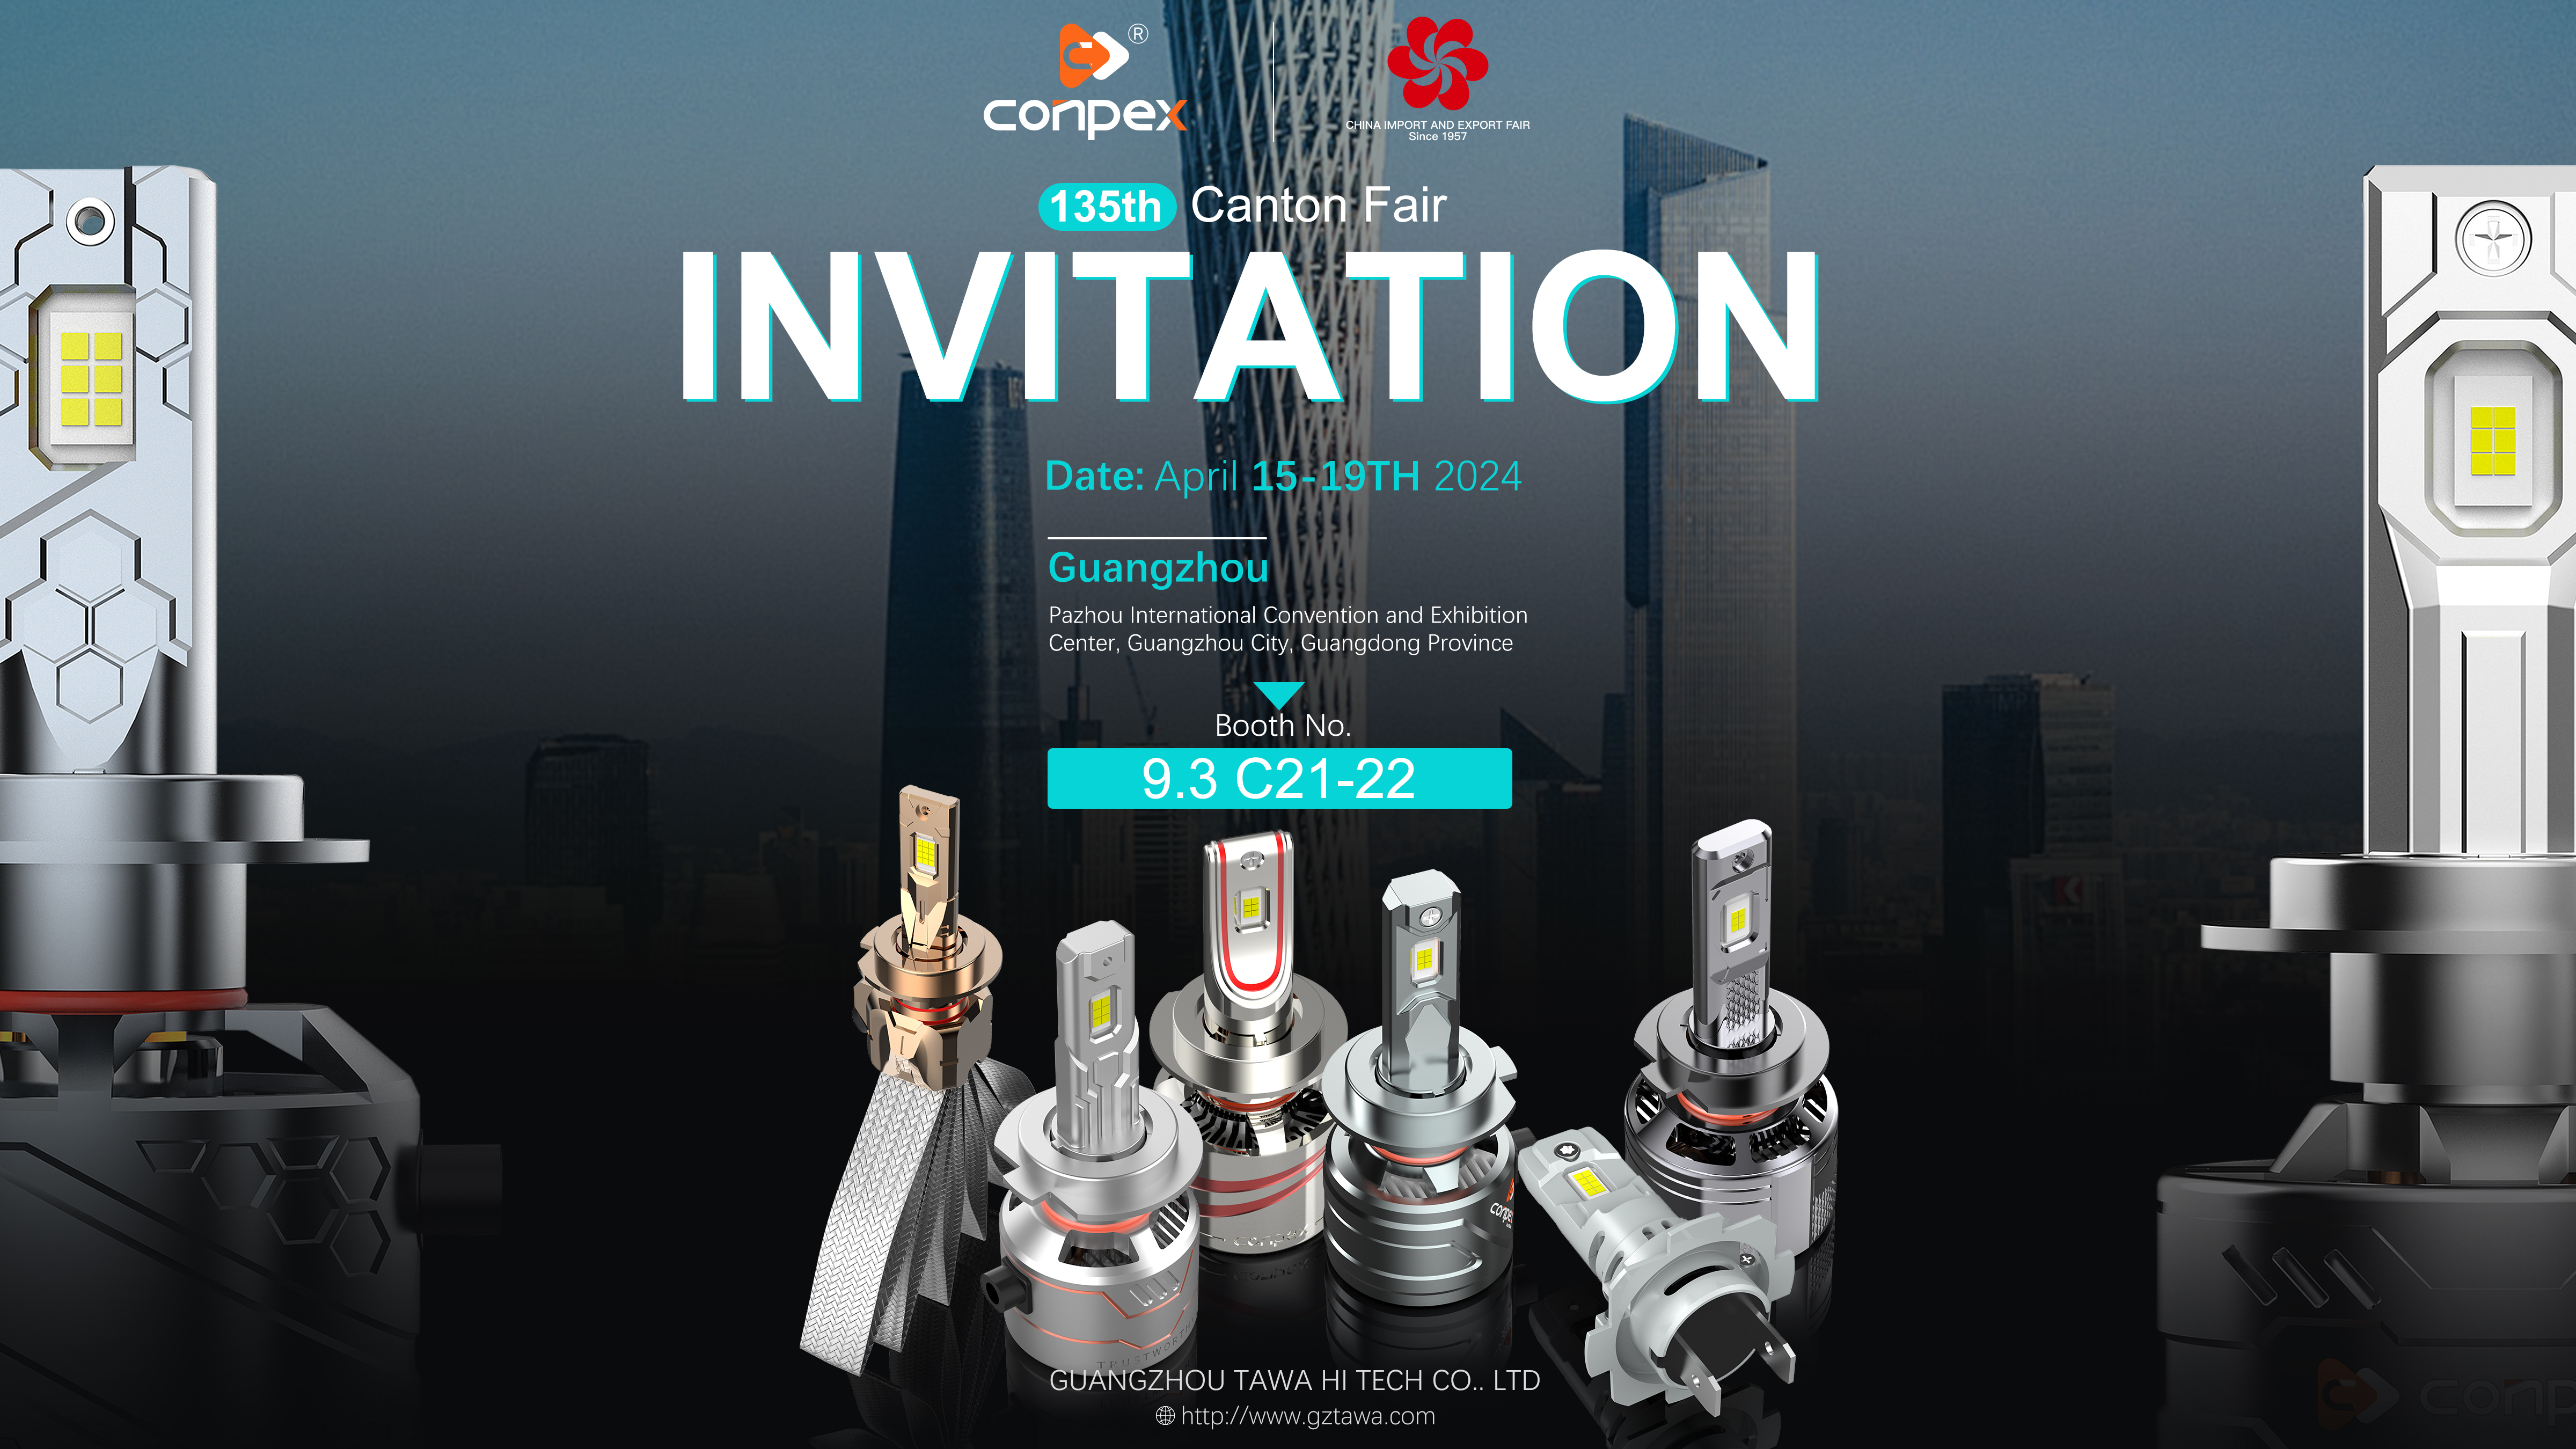 Discover Innovation at the 135th Canton Fair with Conpex!